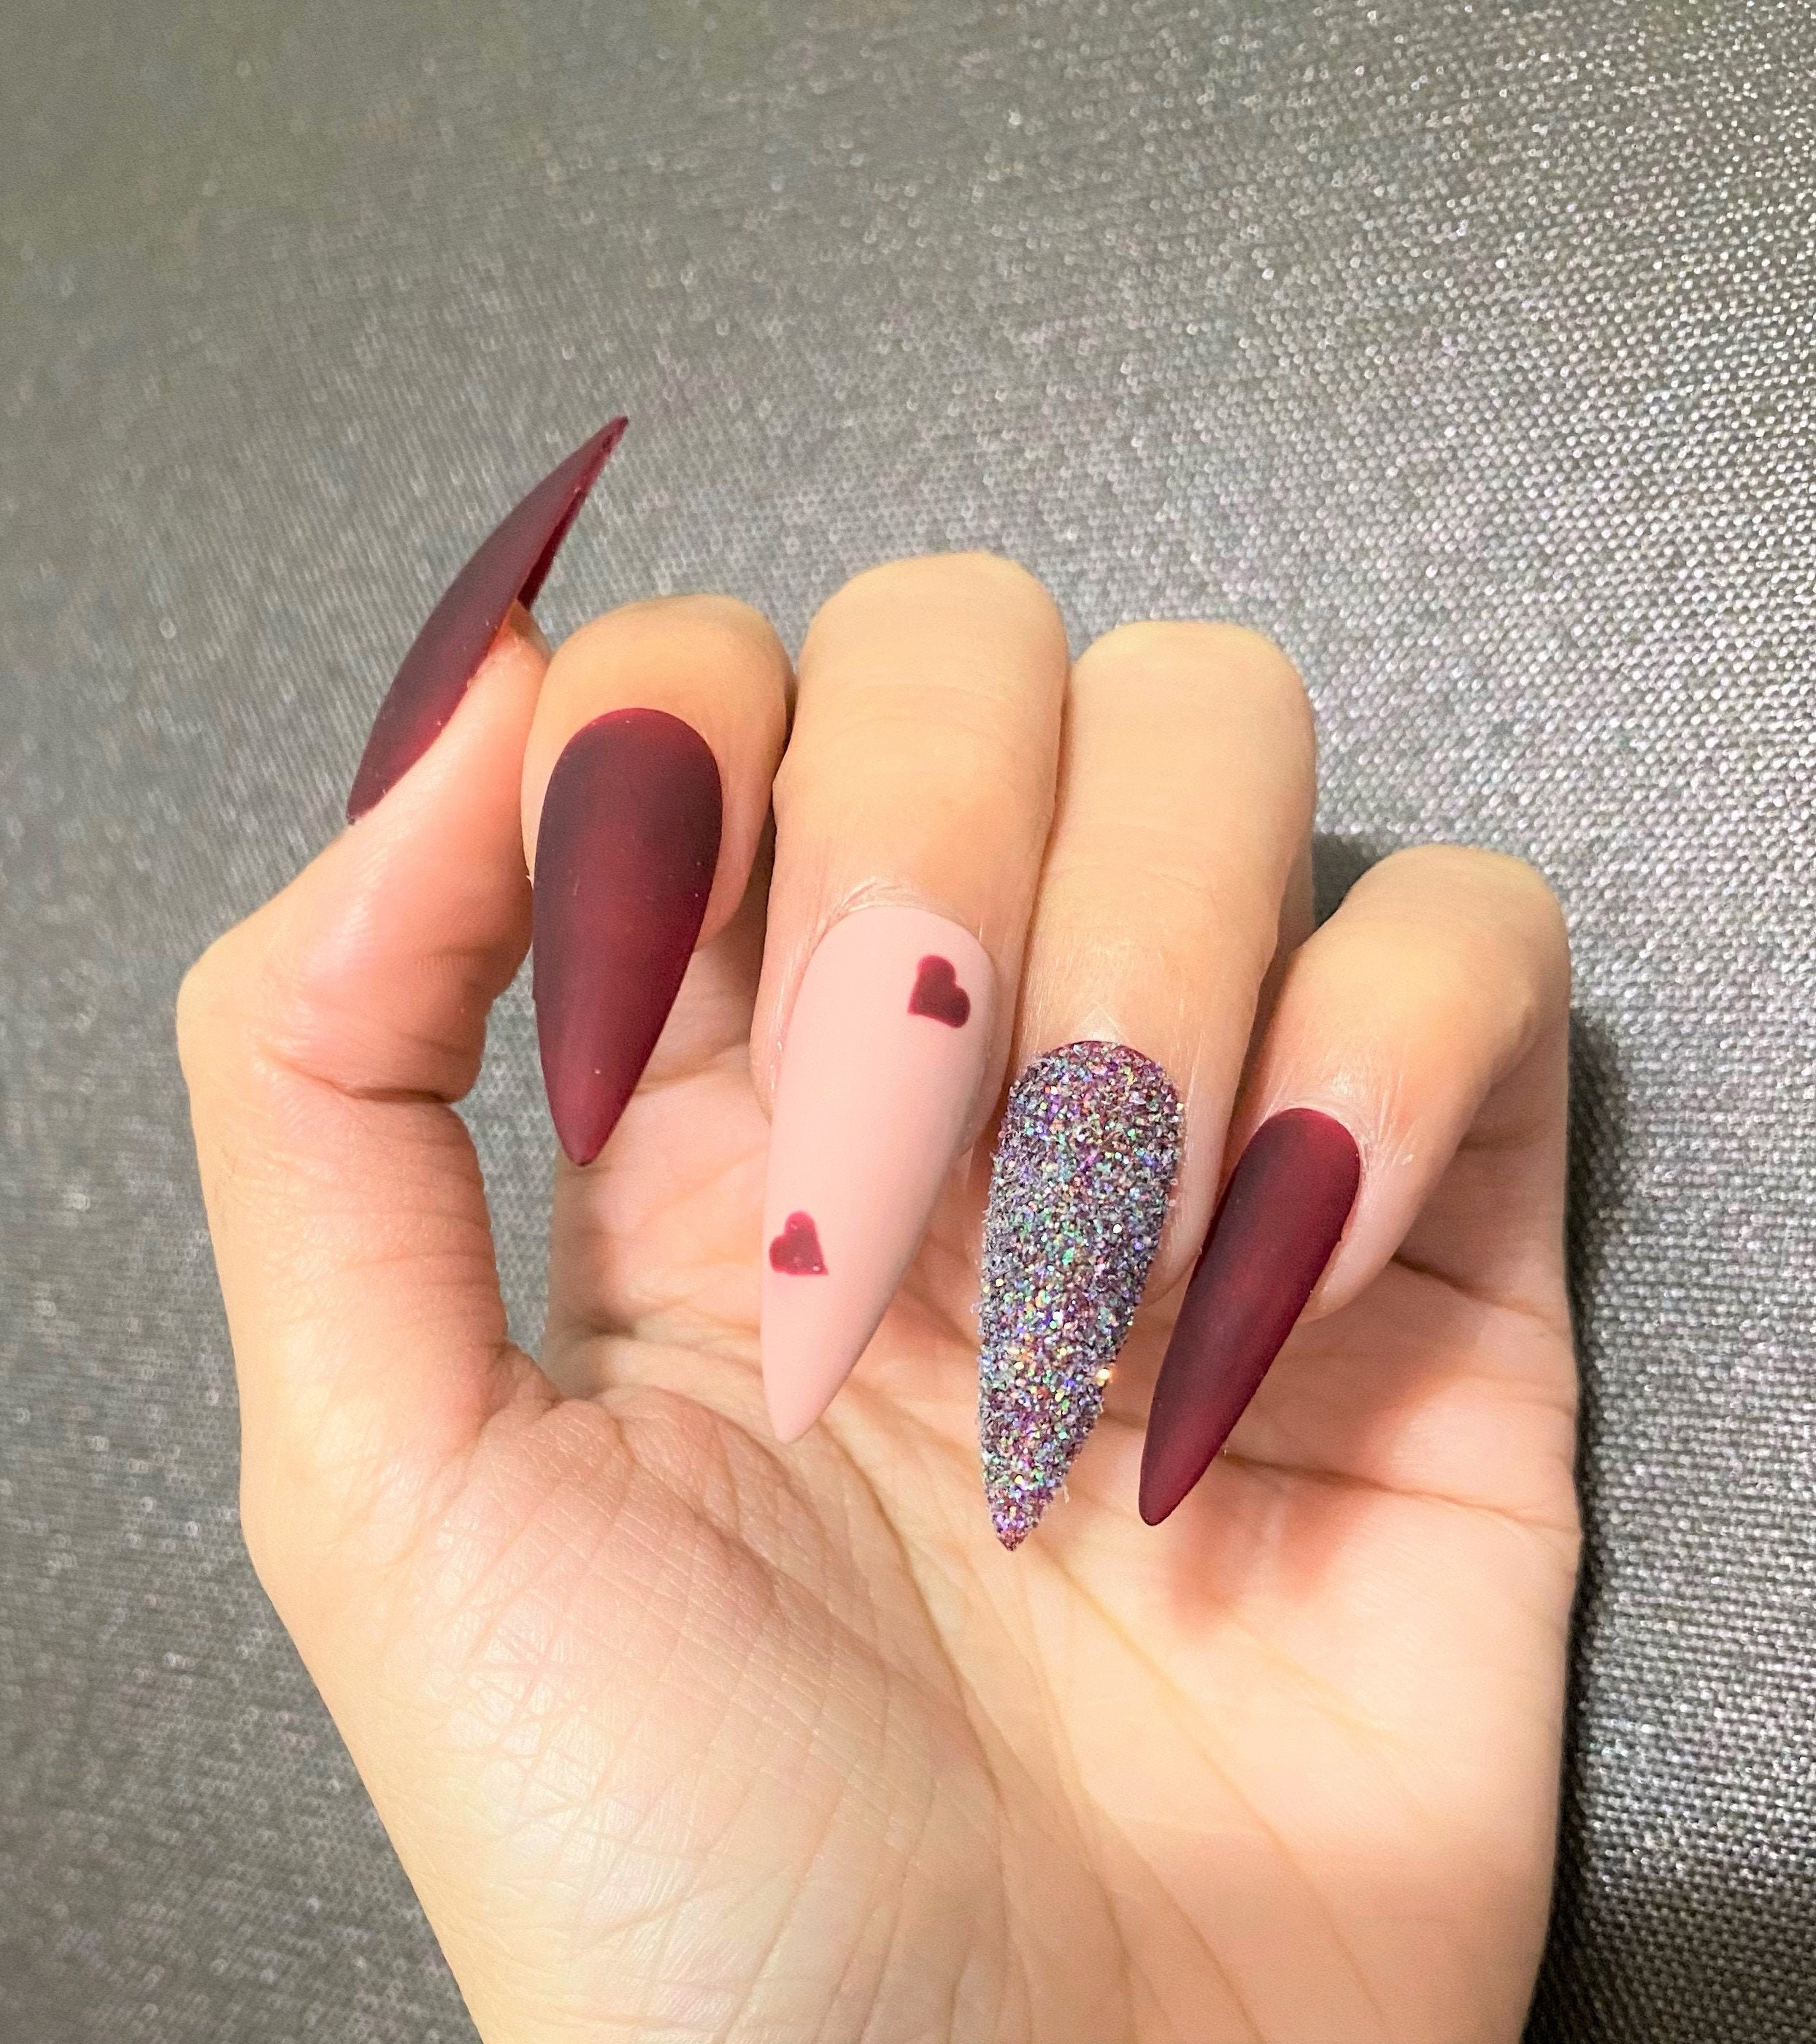 Stiletto Nails. Nails with Rhinestones. Brown Matte Nails. Fall Nails.   Rhinestone nails, Stiletto nails designs, Nails design with rhinestones